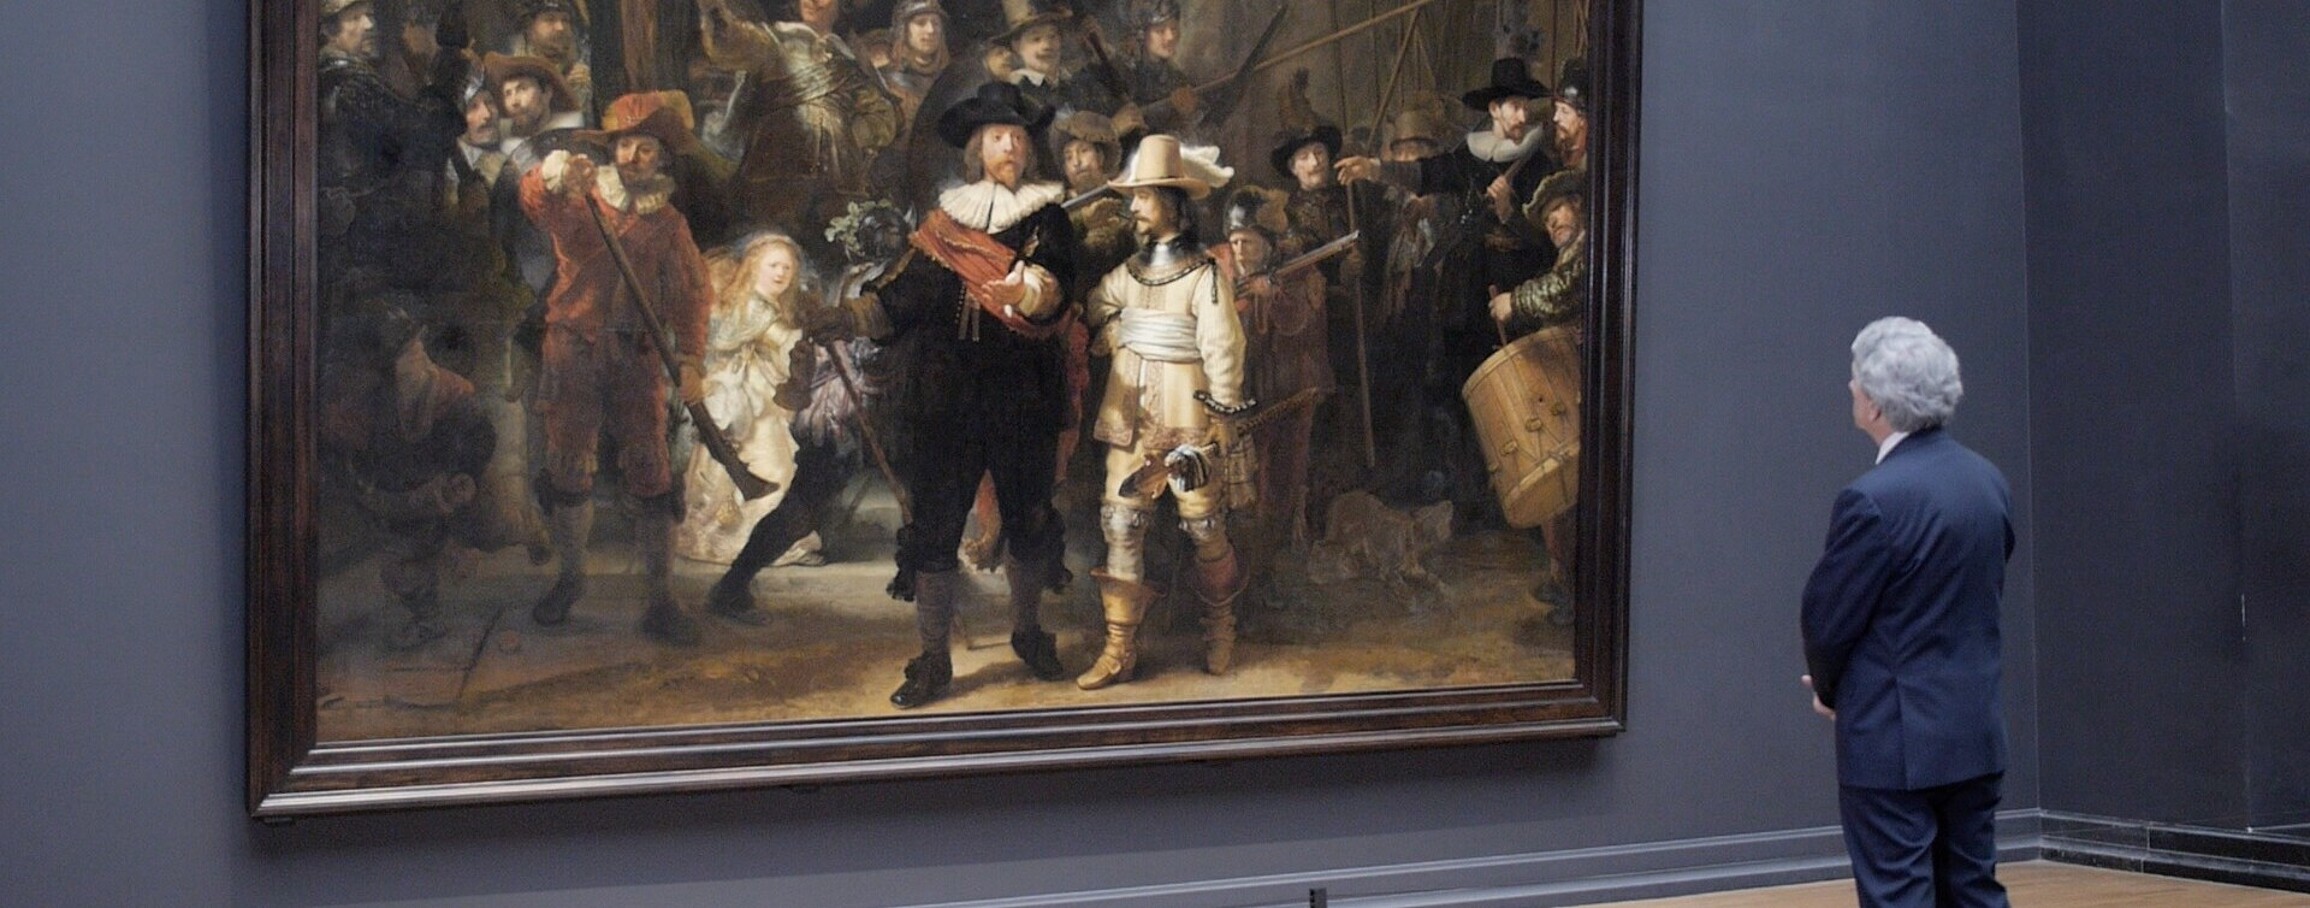 A man is looking at the dutch painting the "nachtwacht" created by Rembrandt van Rijn